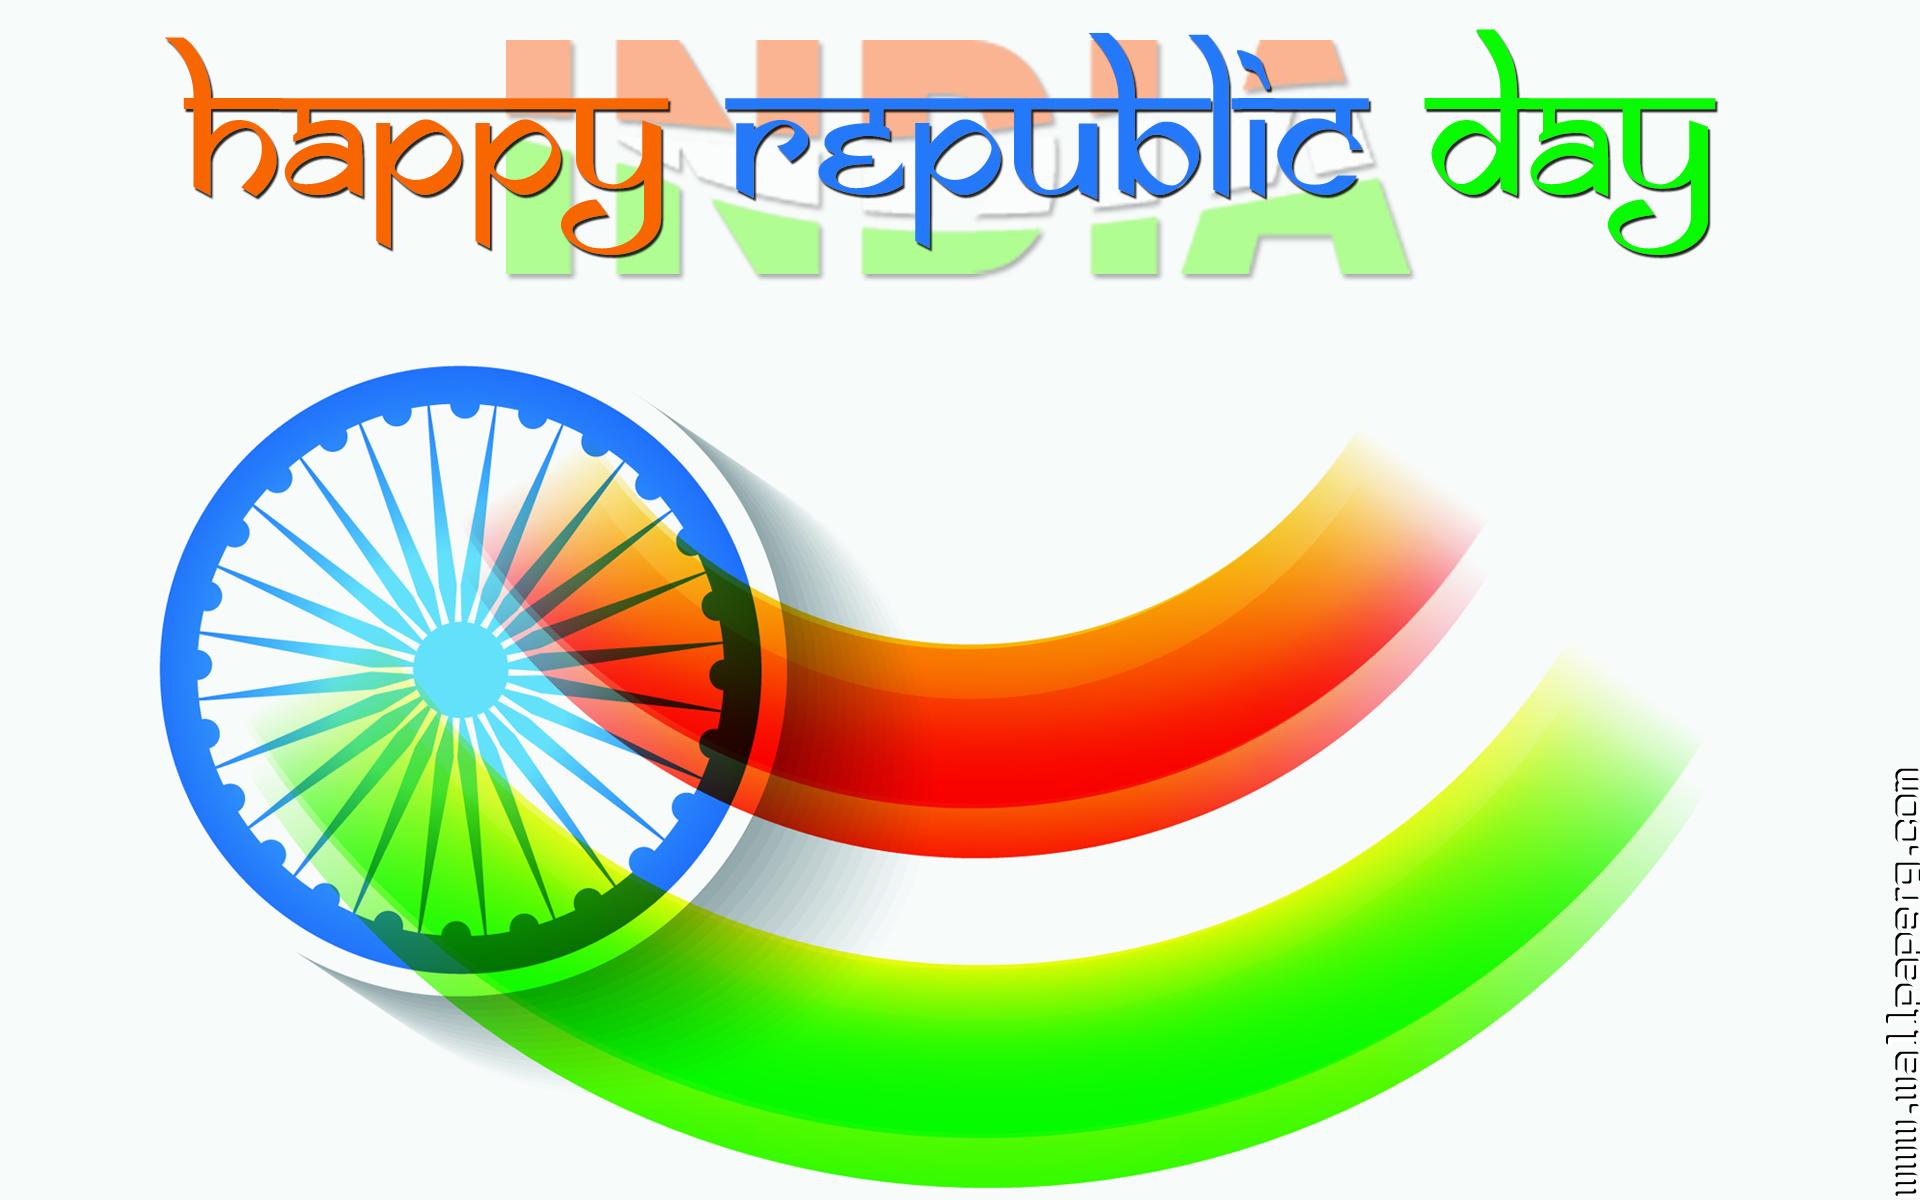 Download New greetings for happy republic day 2015 - Republic day wallpapers  for your mobile cell phone